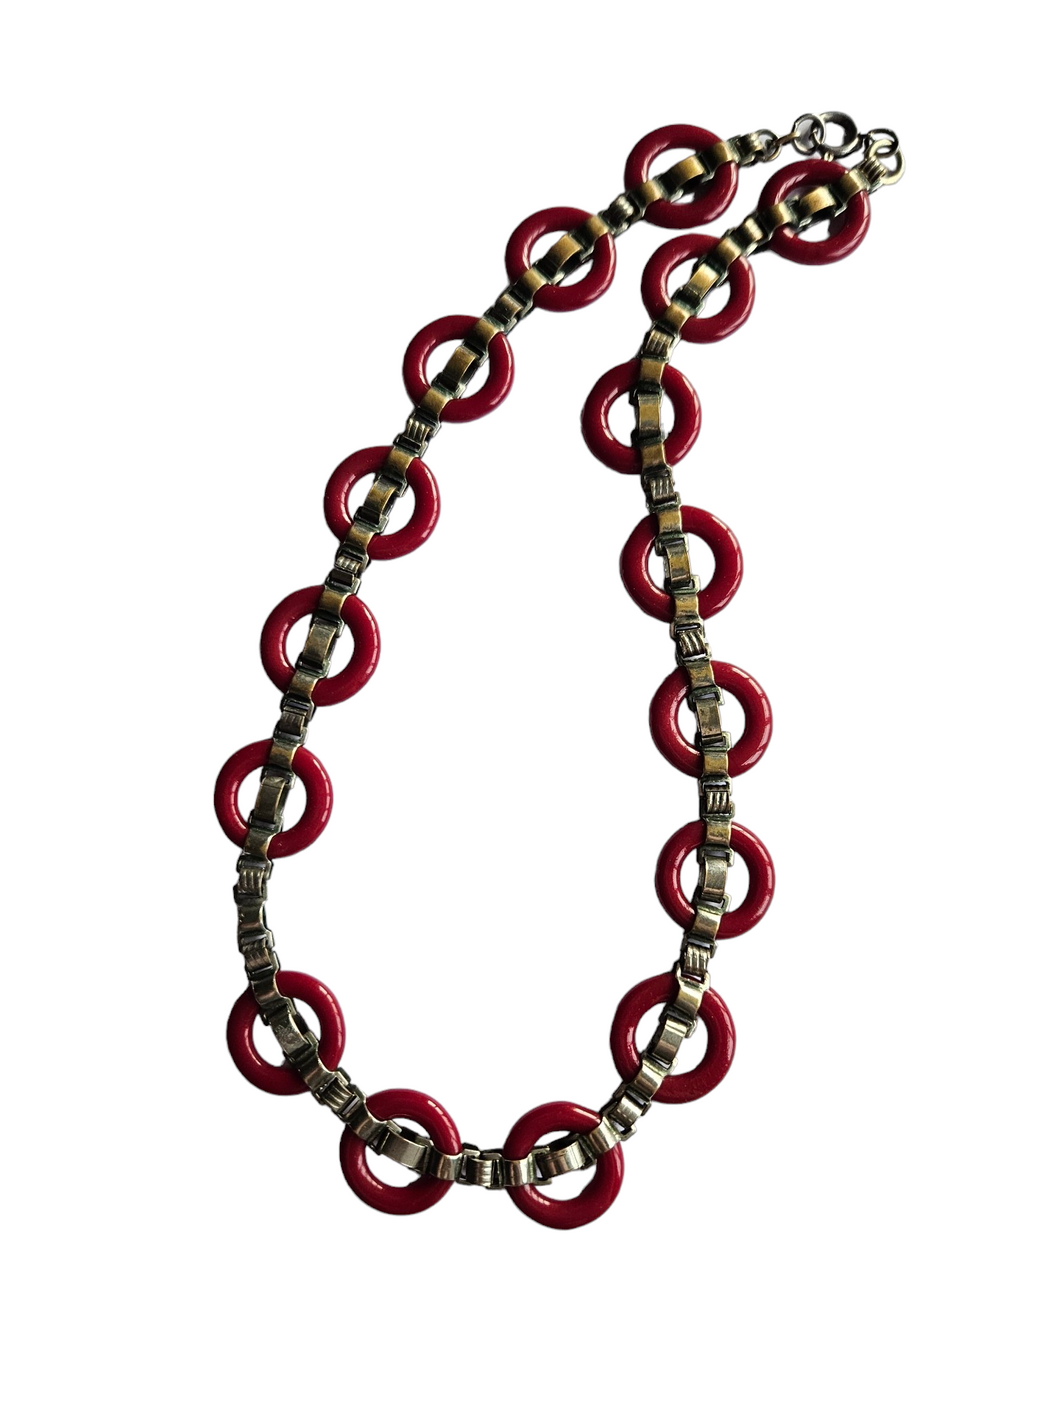 1930s Unusual Deco Metal and Red Necklace